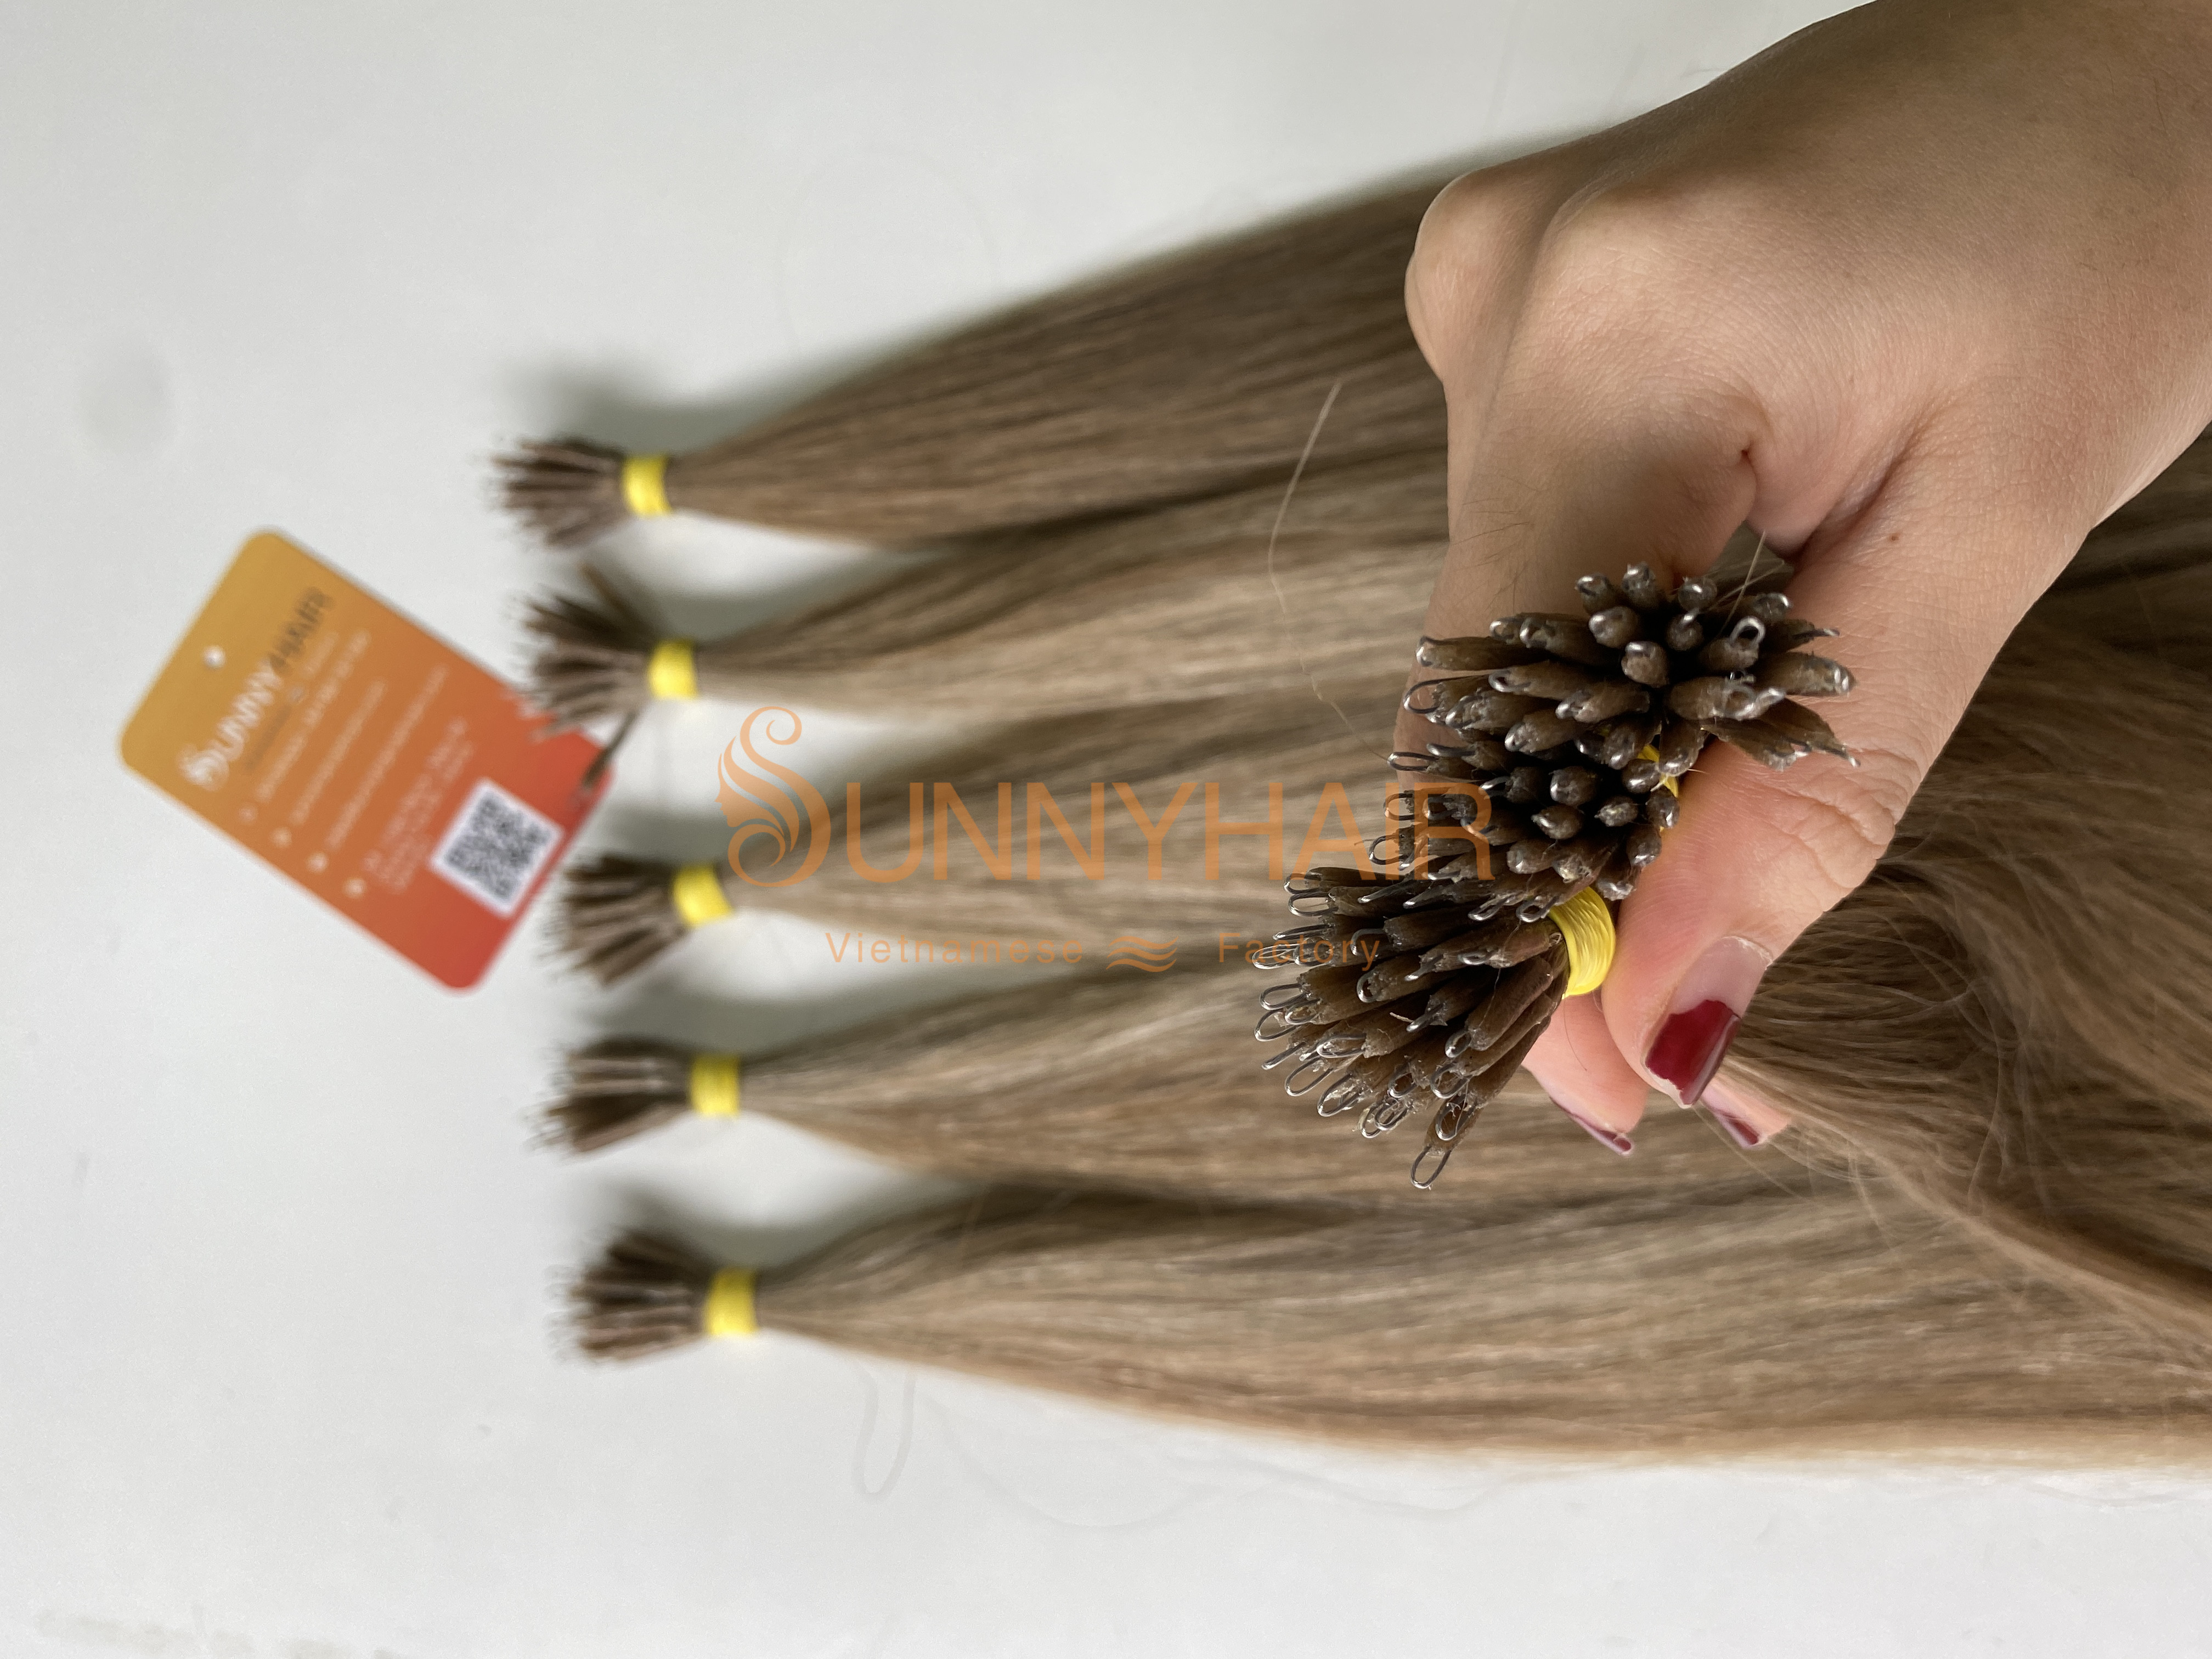 Nano Ring Hair Extension Undetectable Hair Extension Customizable Styles |Vietnam Hair Supplier